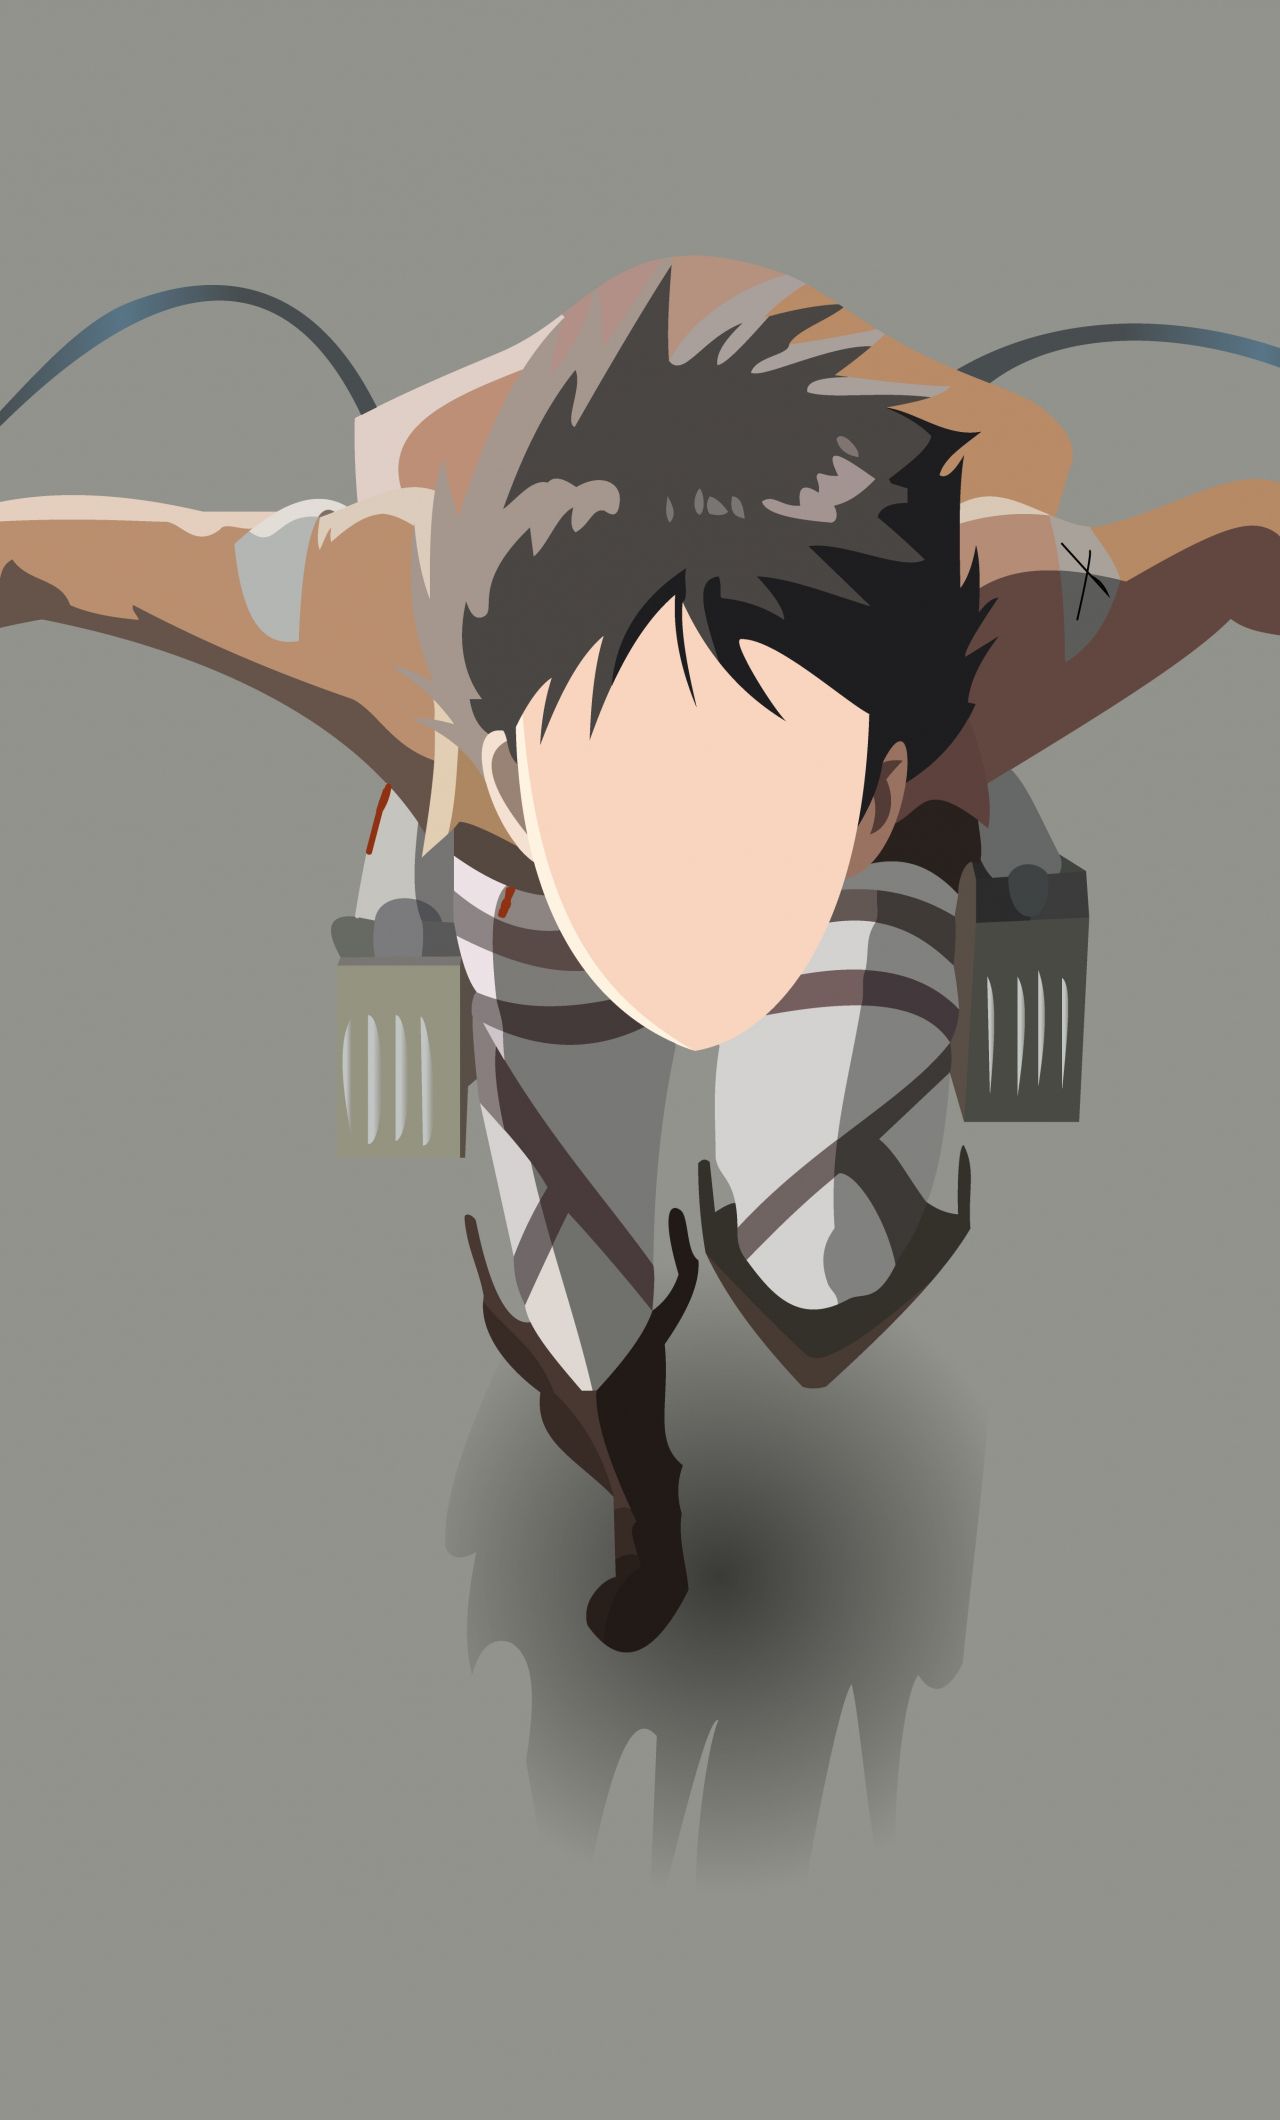 Download 1280x2120 wallpaper eren yeager, attack on titan, anime boy, iphone 6 plus, 1280x2120 HD image, background, 752